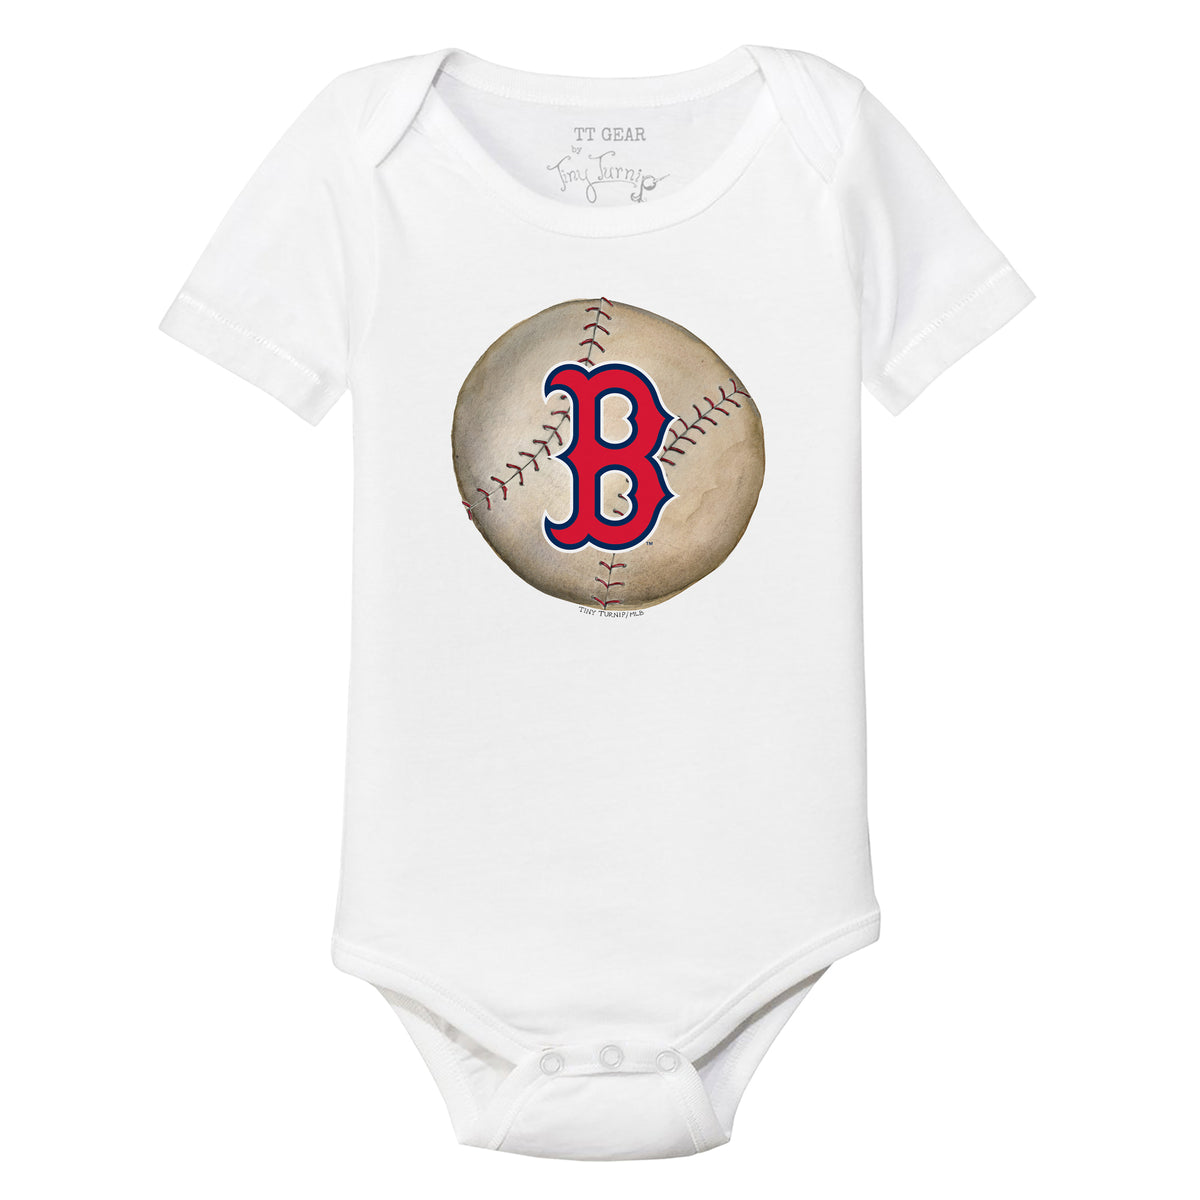 Red Sox, Red Sox Baby Outfit, Red Sox Girl's Outfit, Red Sox Baby, Red Sox  Girl, Red Sox Fan, Father's Day Gift, Newborn Red Sox Outfit